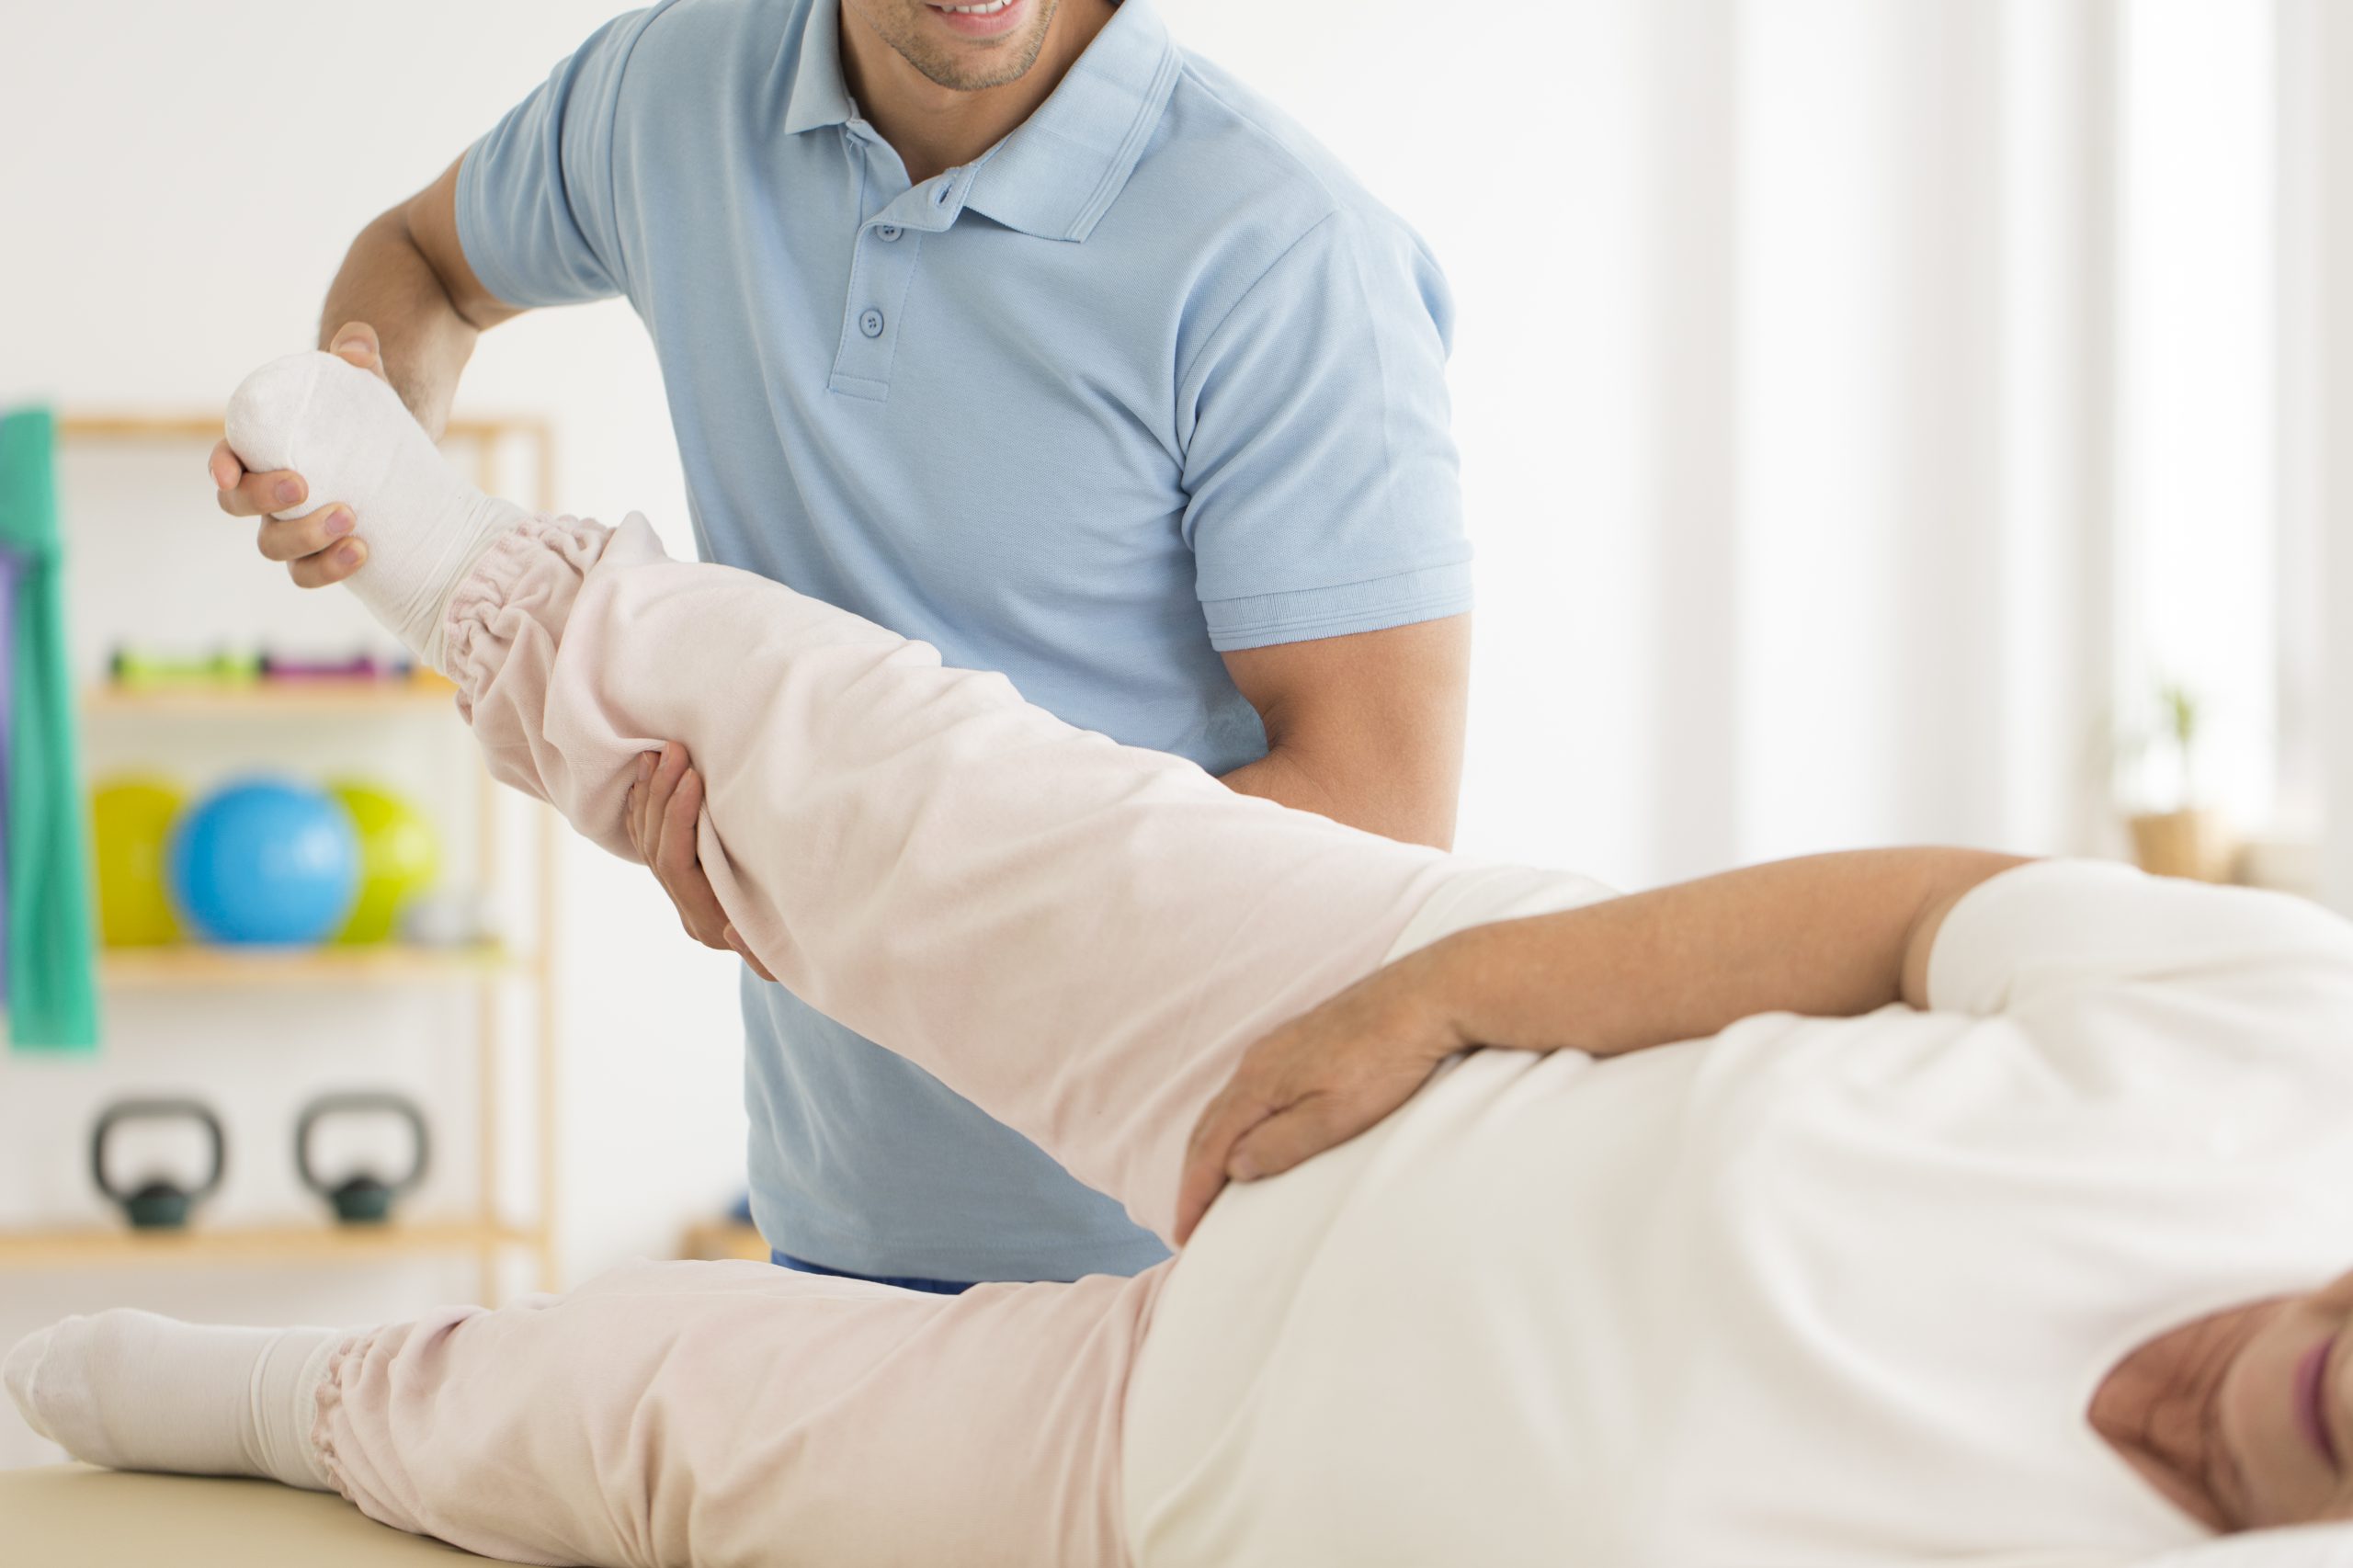 Personal physiotherapist rehabilitating joints